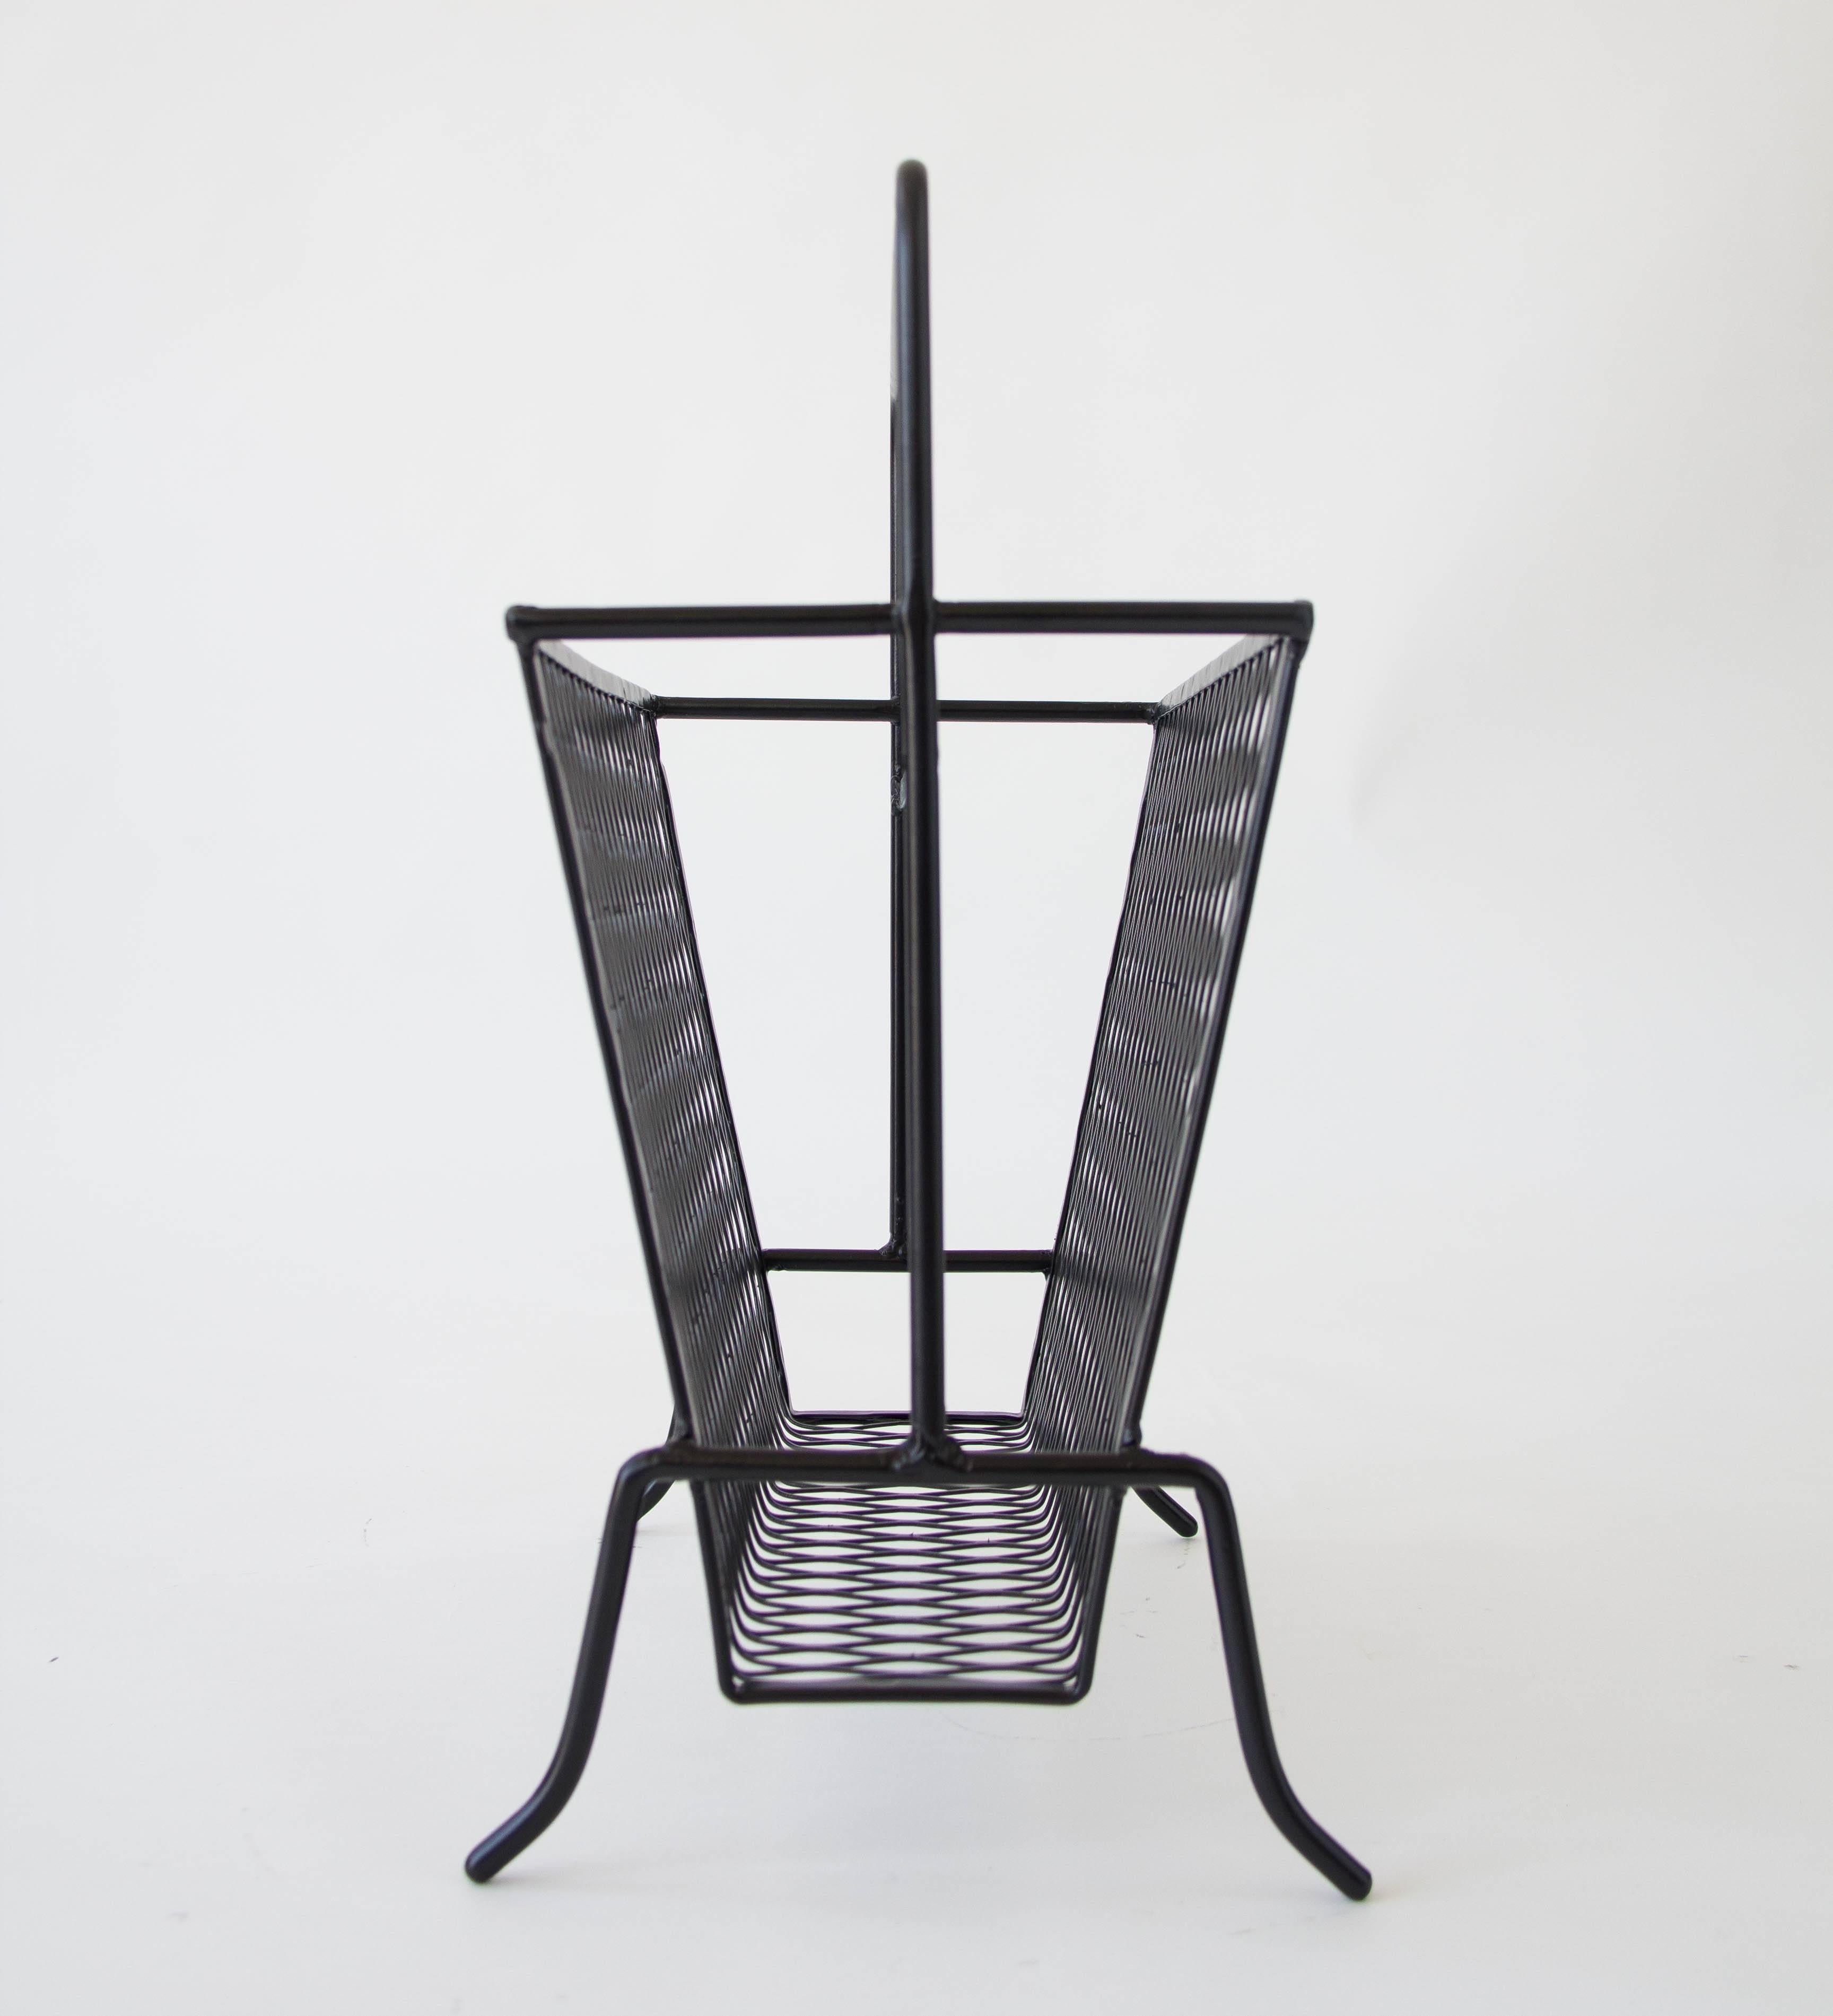 A Salterini-inspired wire magazine rack with wire mesh sides, a central handle, and four stylistically bent legs. The upright storage has slightly angled sides. 

Condition: Excellent restored condition; professionally powder-coated.